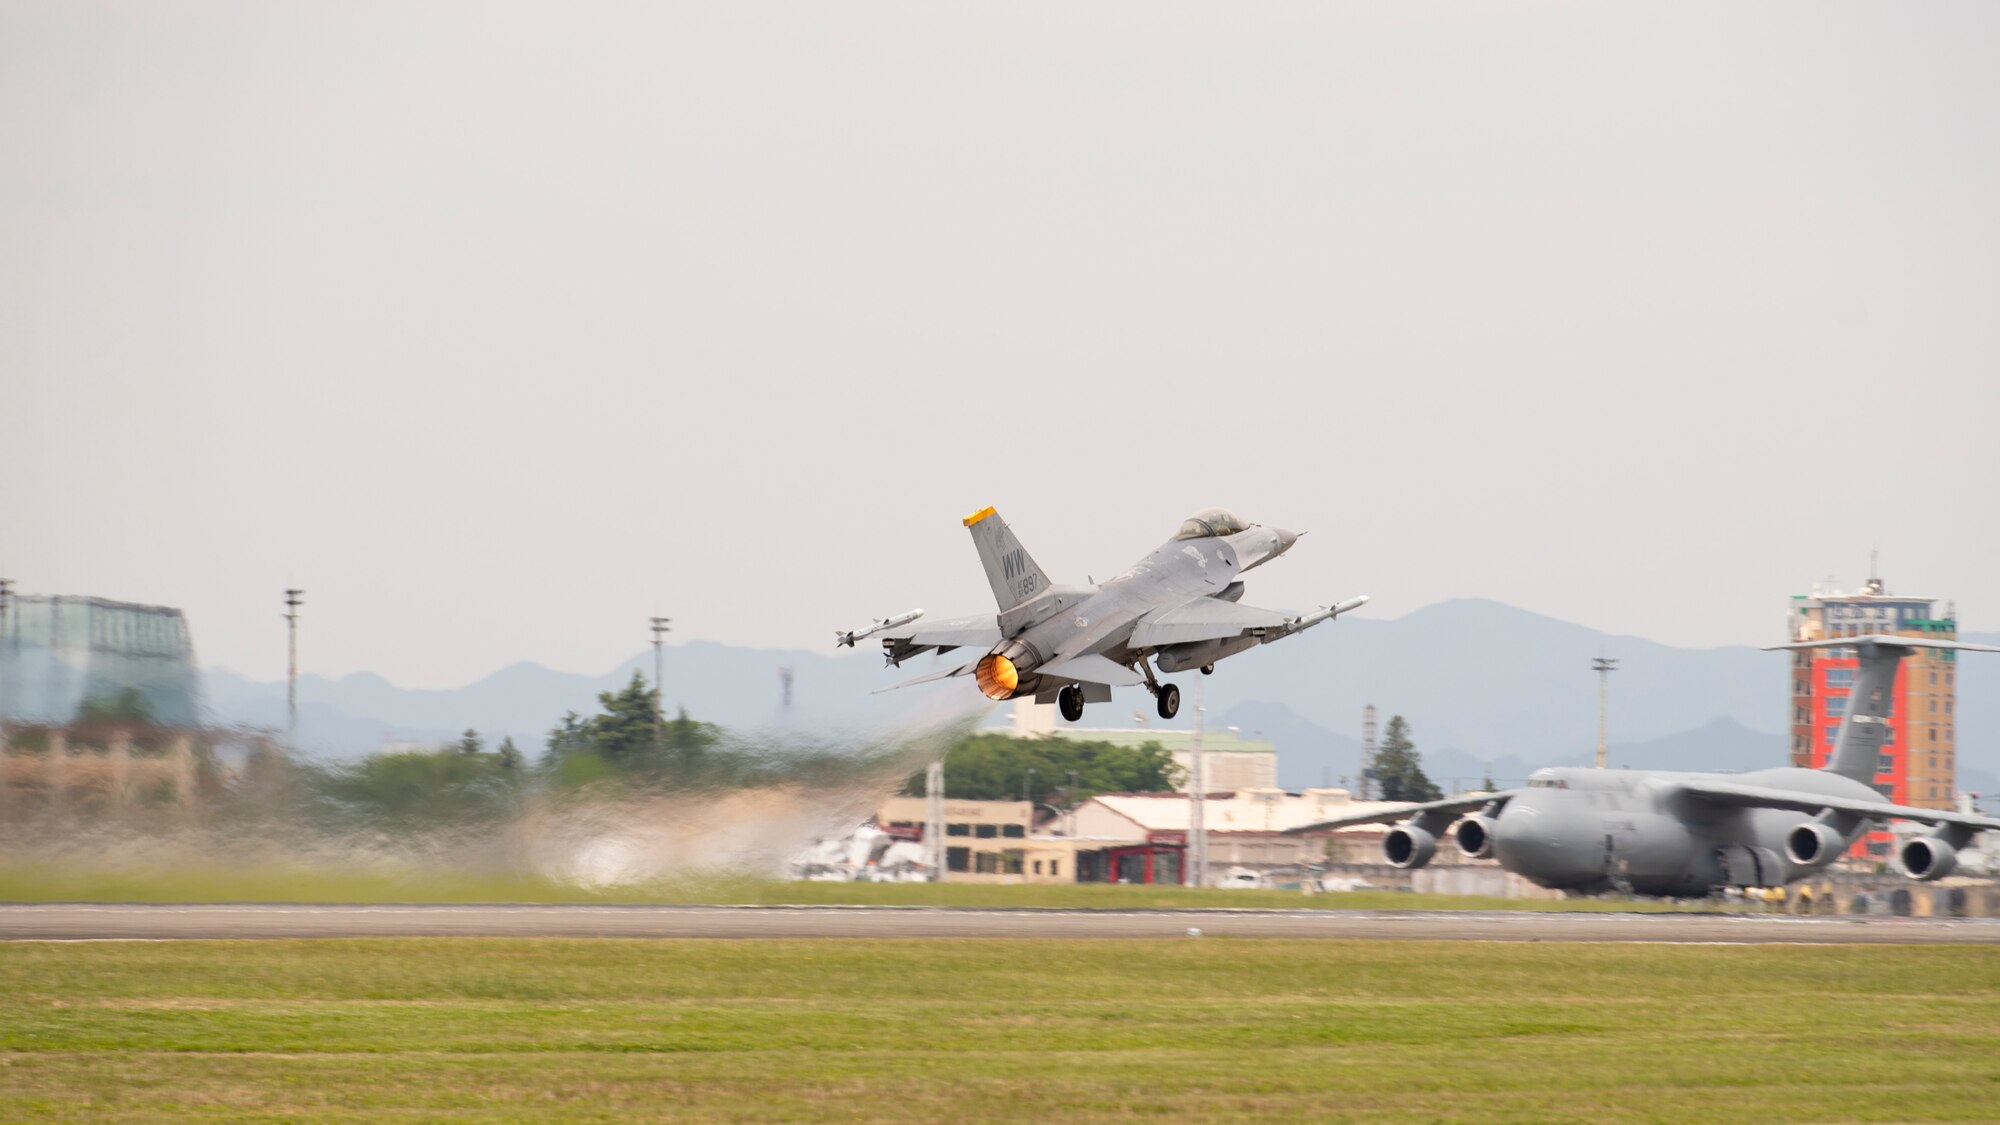 A view from behind and below of a fighter jet taking off from the runway.